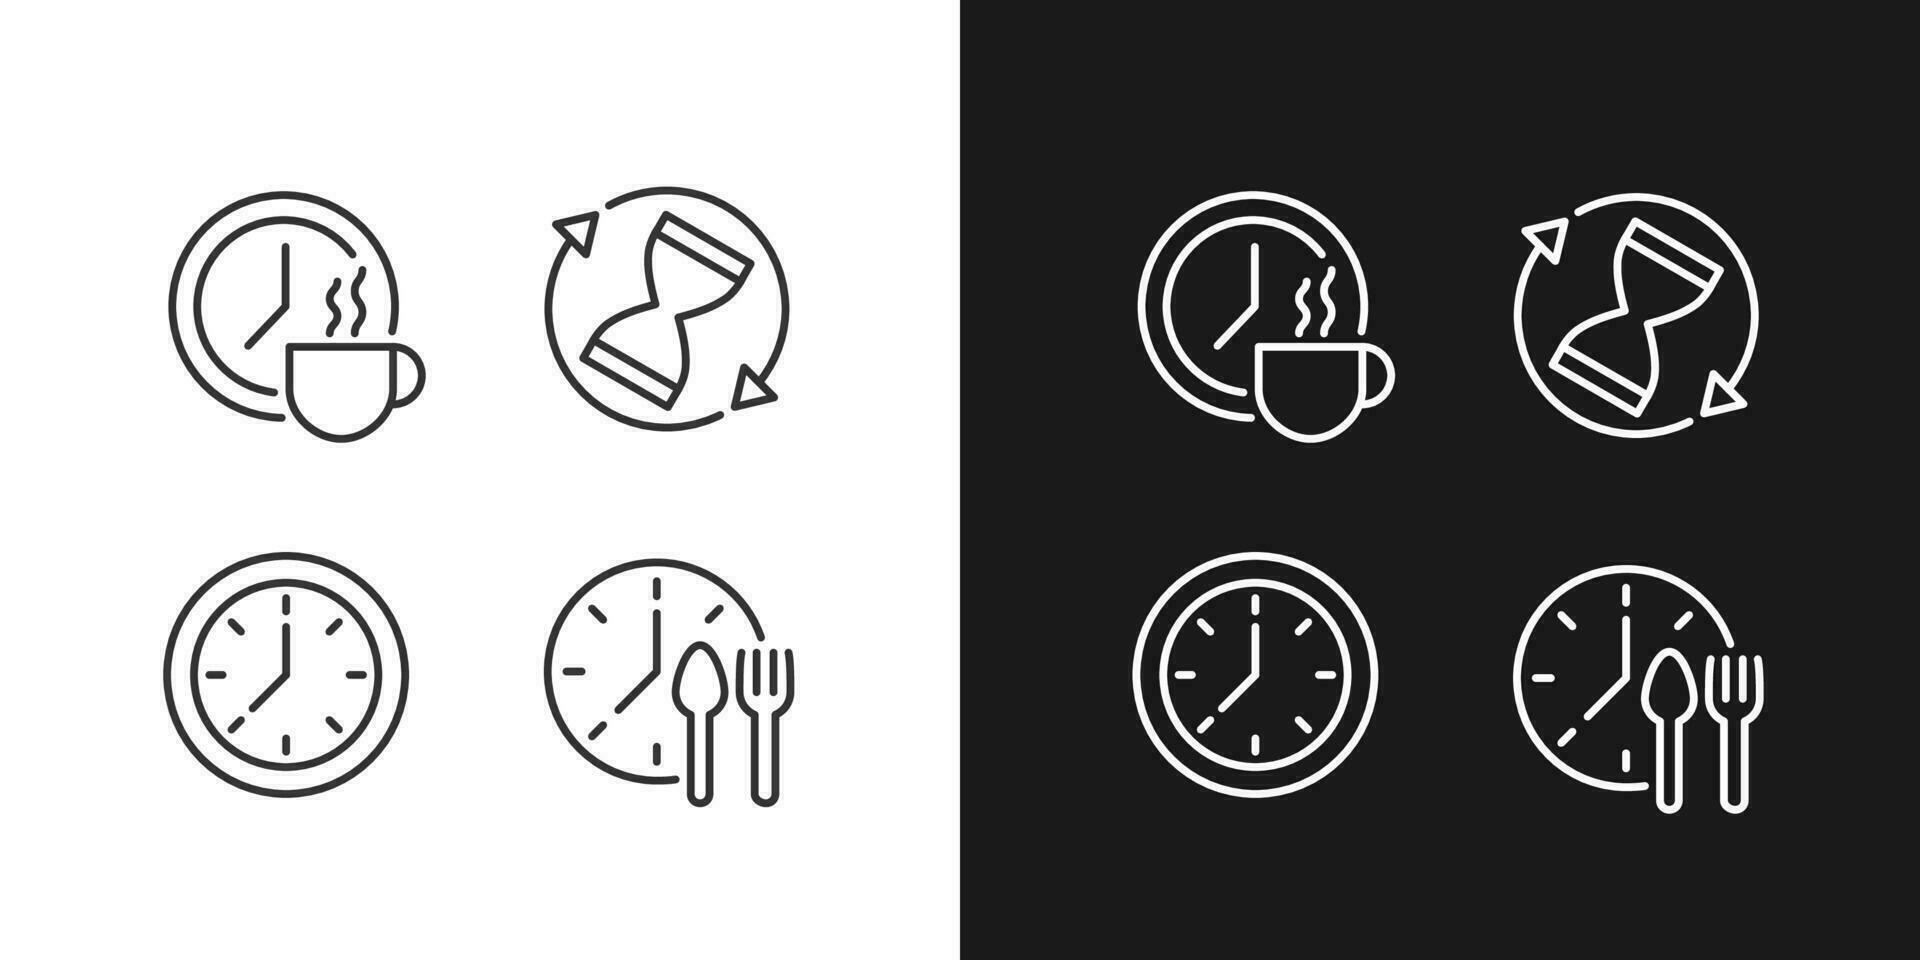 Managing time efficiently pixel perfect linear icons set for dark, light mode. Rotating sandglass. Break period. Clock. Thin line symbols for night, day theme. Isolated illustrations. Editable stroke vector